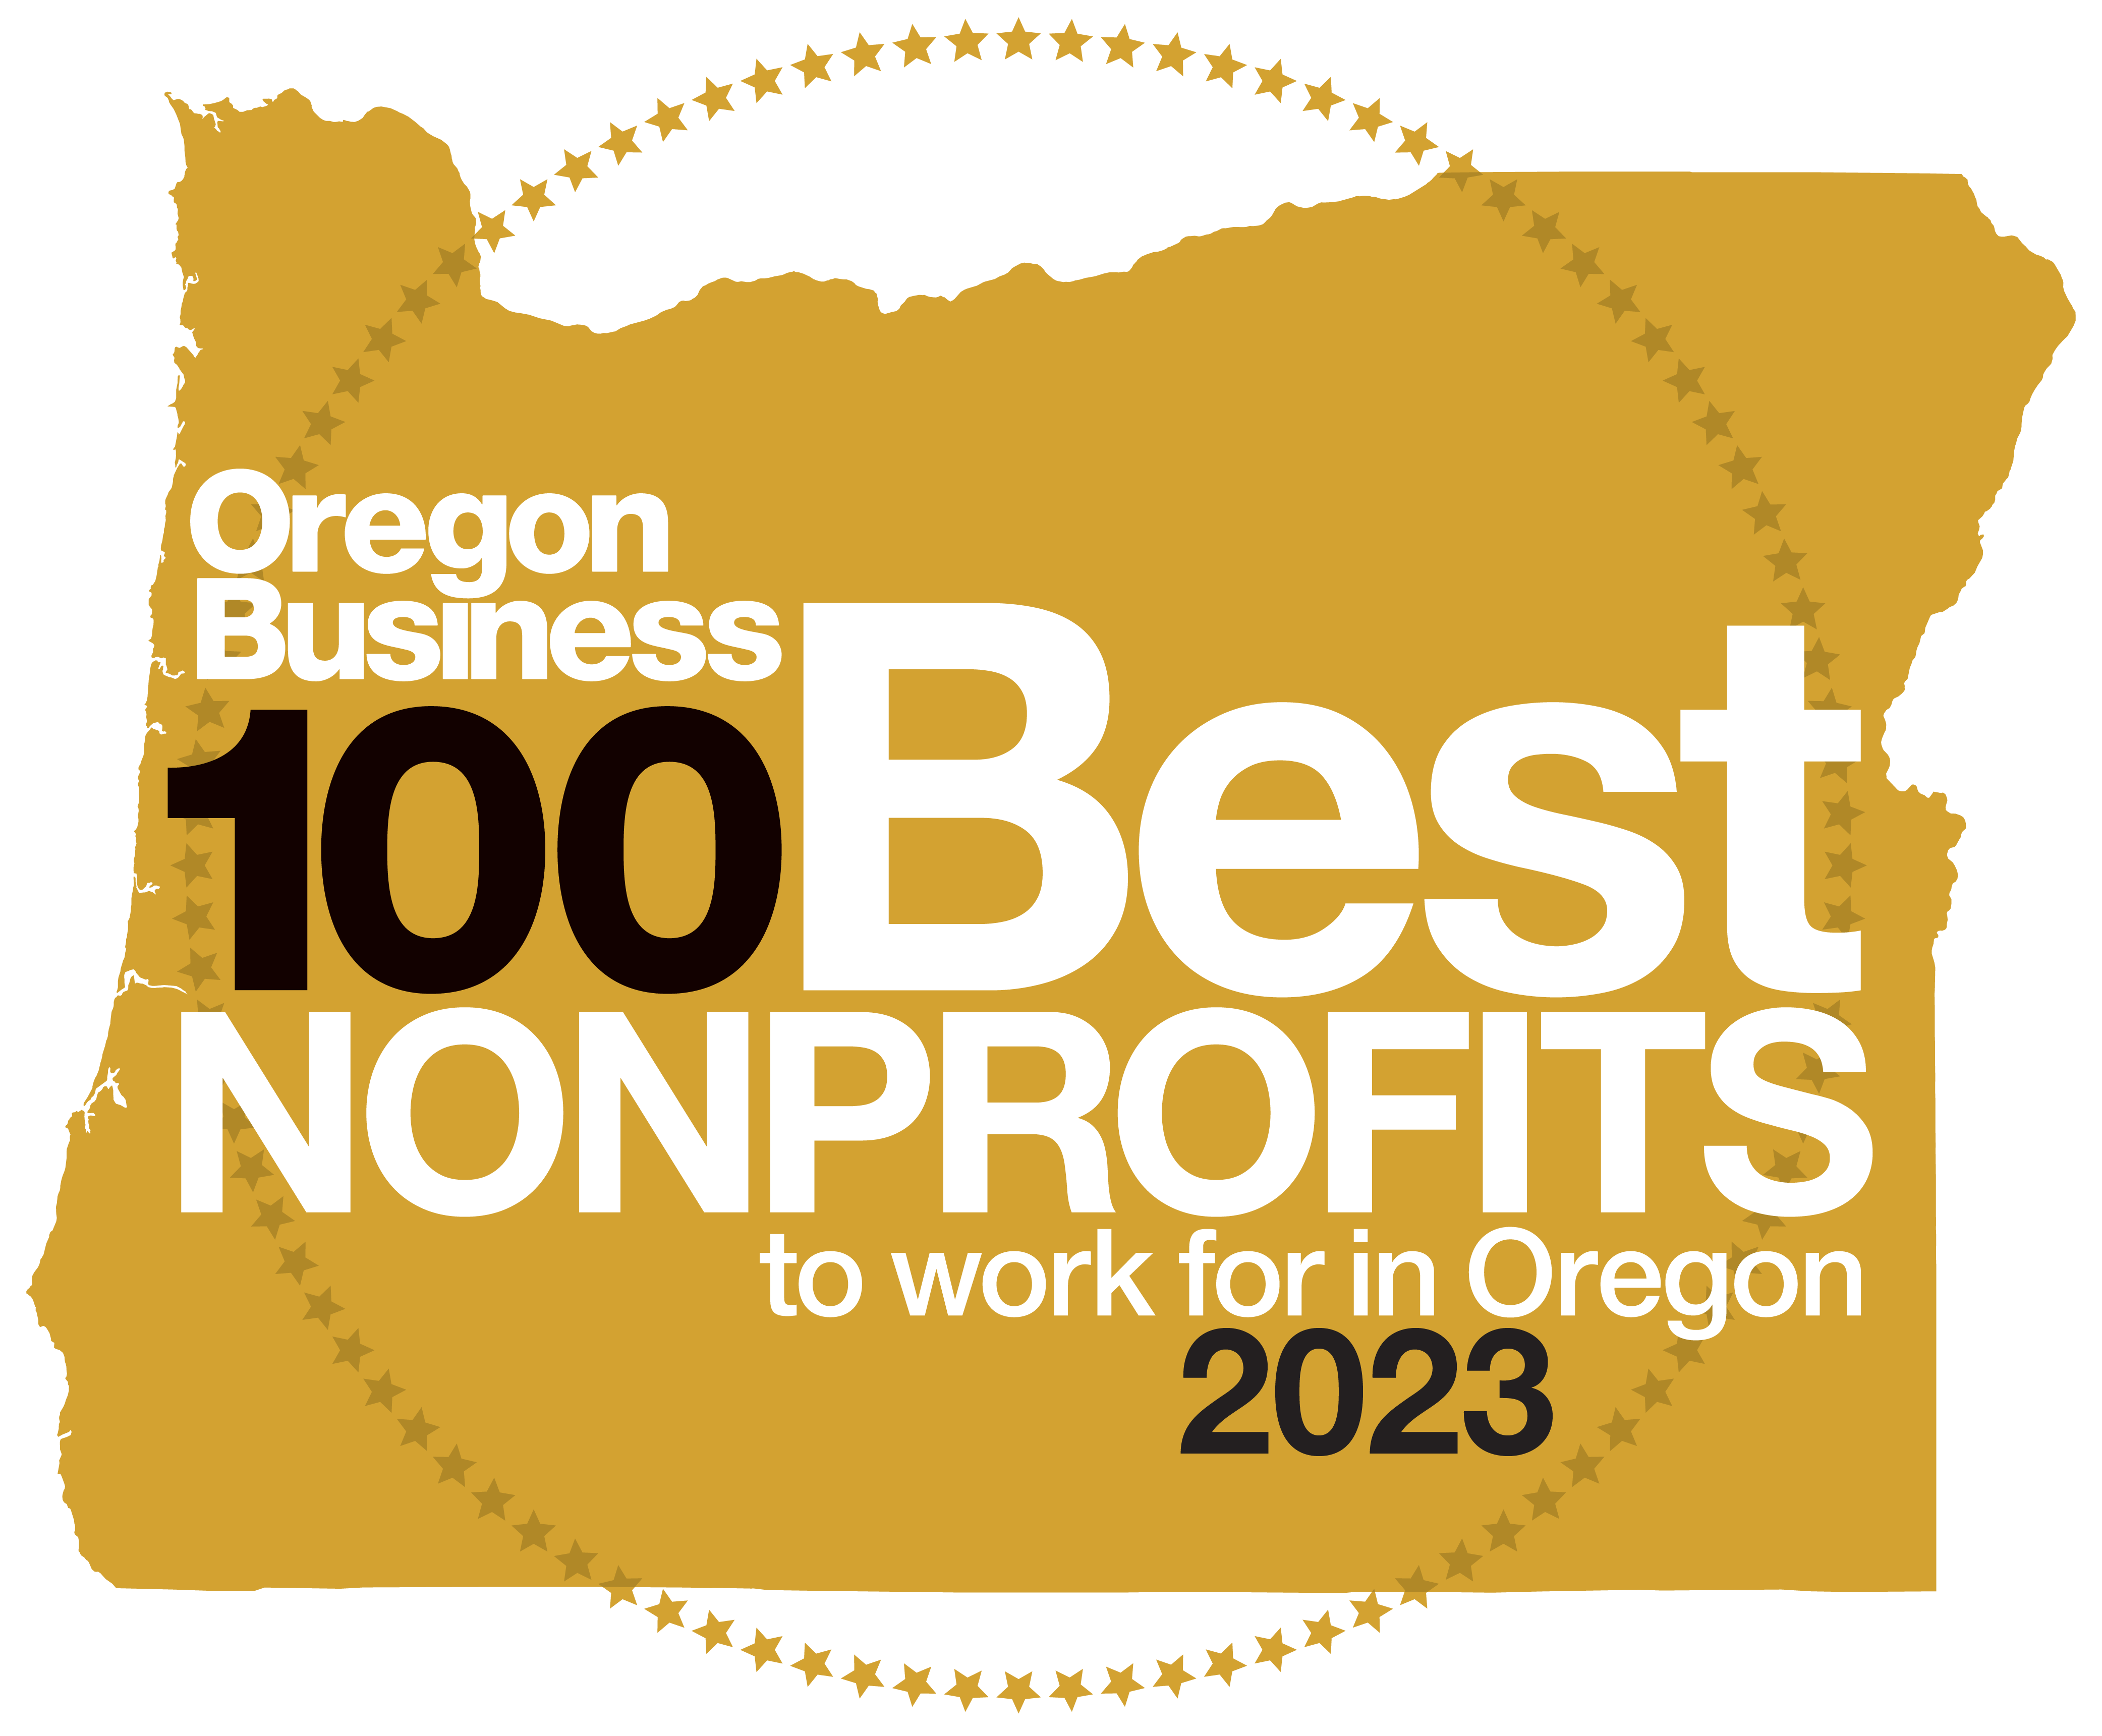 logo of a map of the state of Oregon with text reading: Oregon Business 100 Best Nonprofits to work for in Oregon 2023